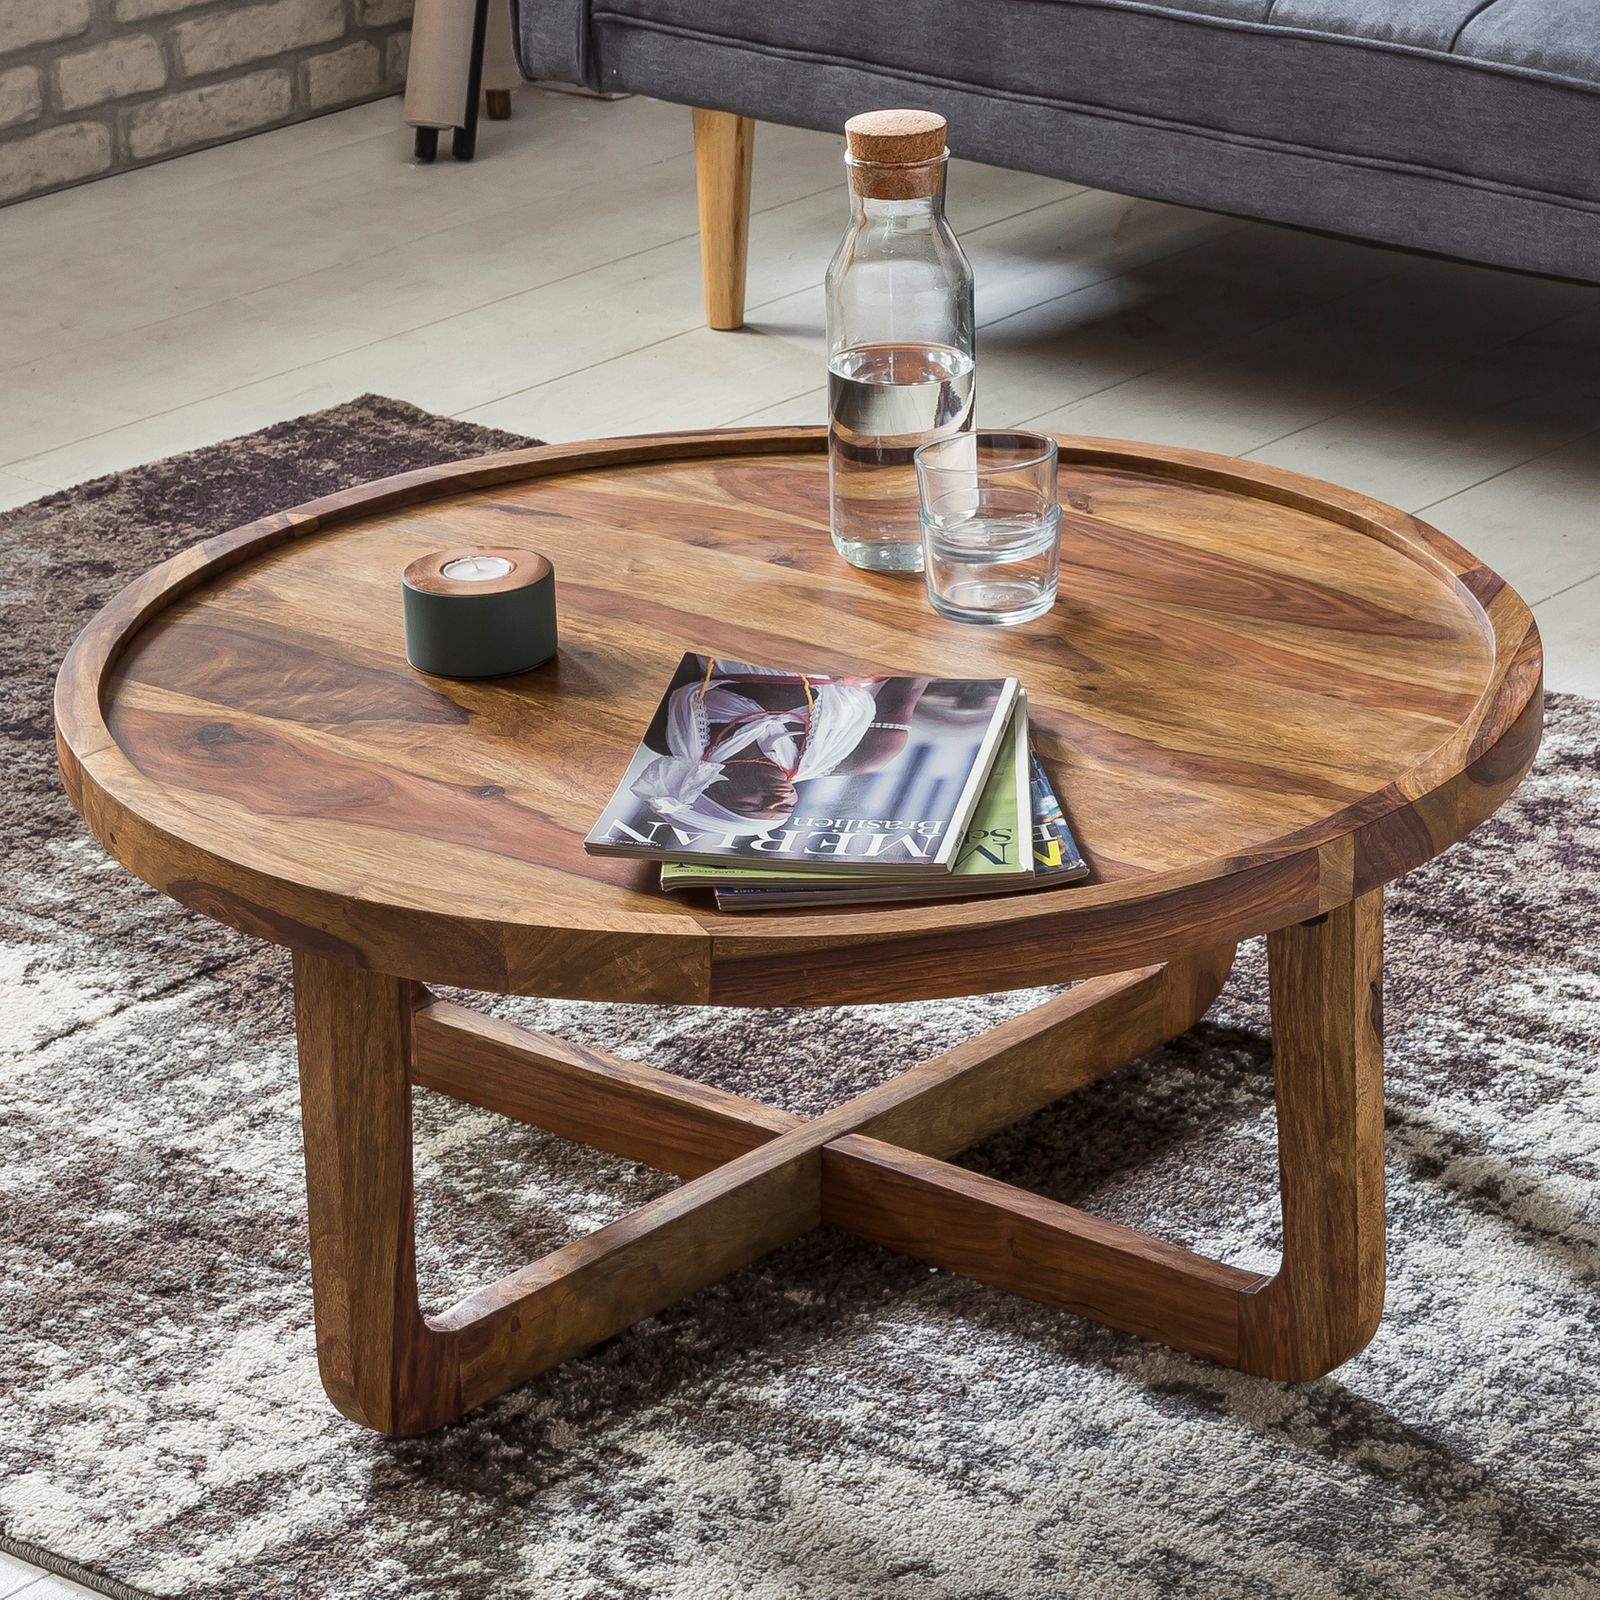 Solid Wood Round Coffee Table Uk – Solid Cedar Round Coffee Table For For Coffee Tables With Round Wooden Tops (Gallery 16 of 20)